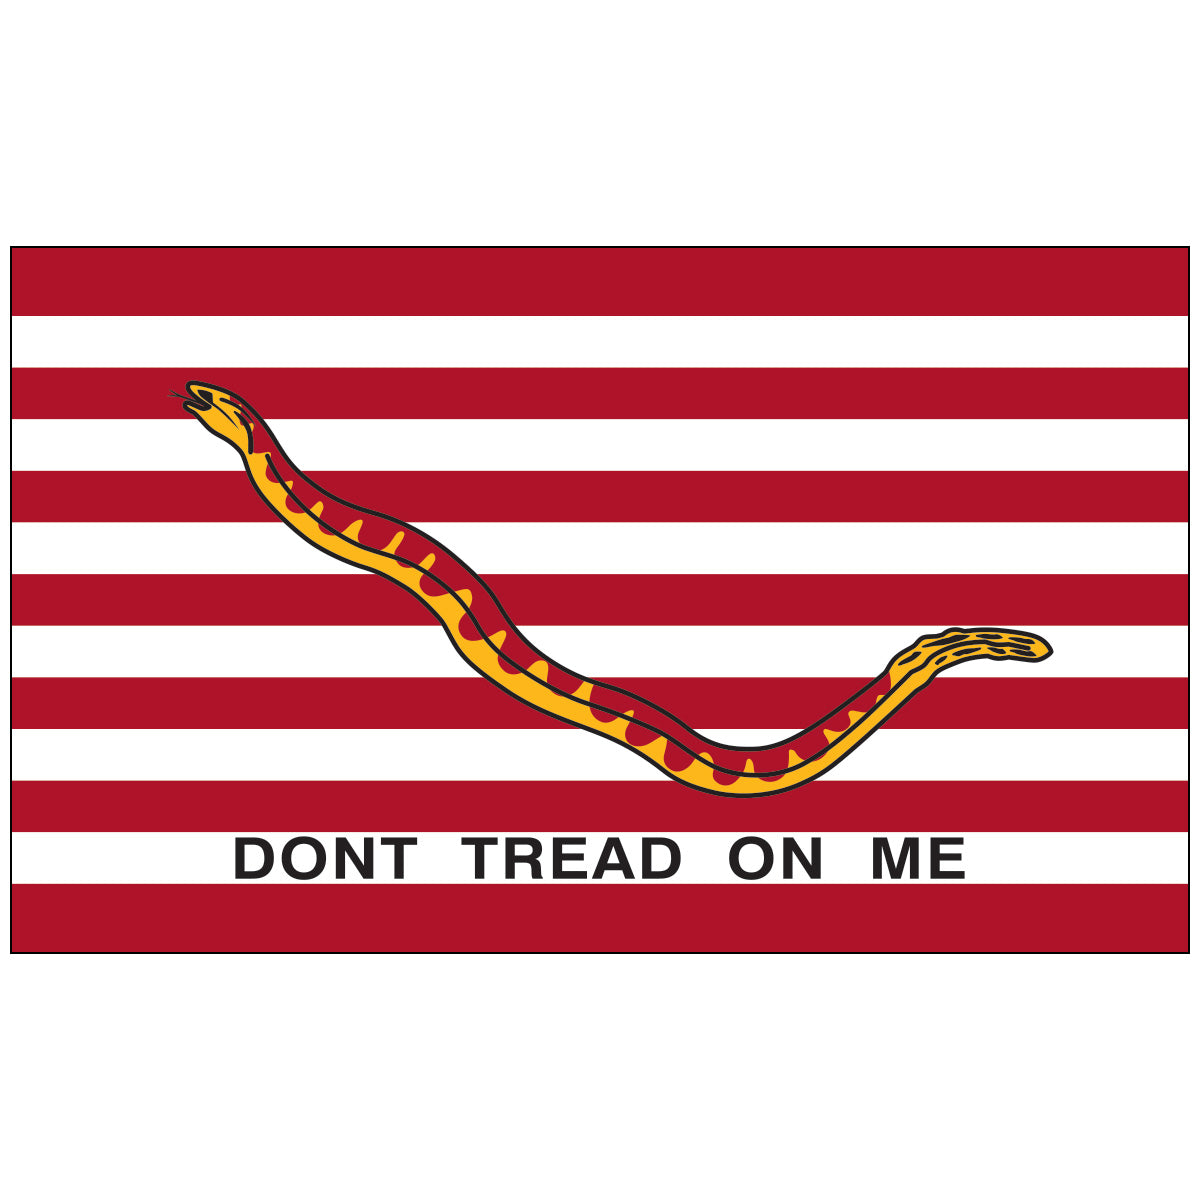 First-Navy-Jack-Historical-Flag-White-Red-Stripes-Snake-Dont-tread-on-me-Flagsource-Southeast-Woodstock-Ga